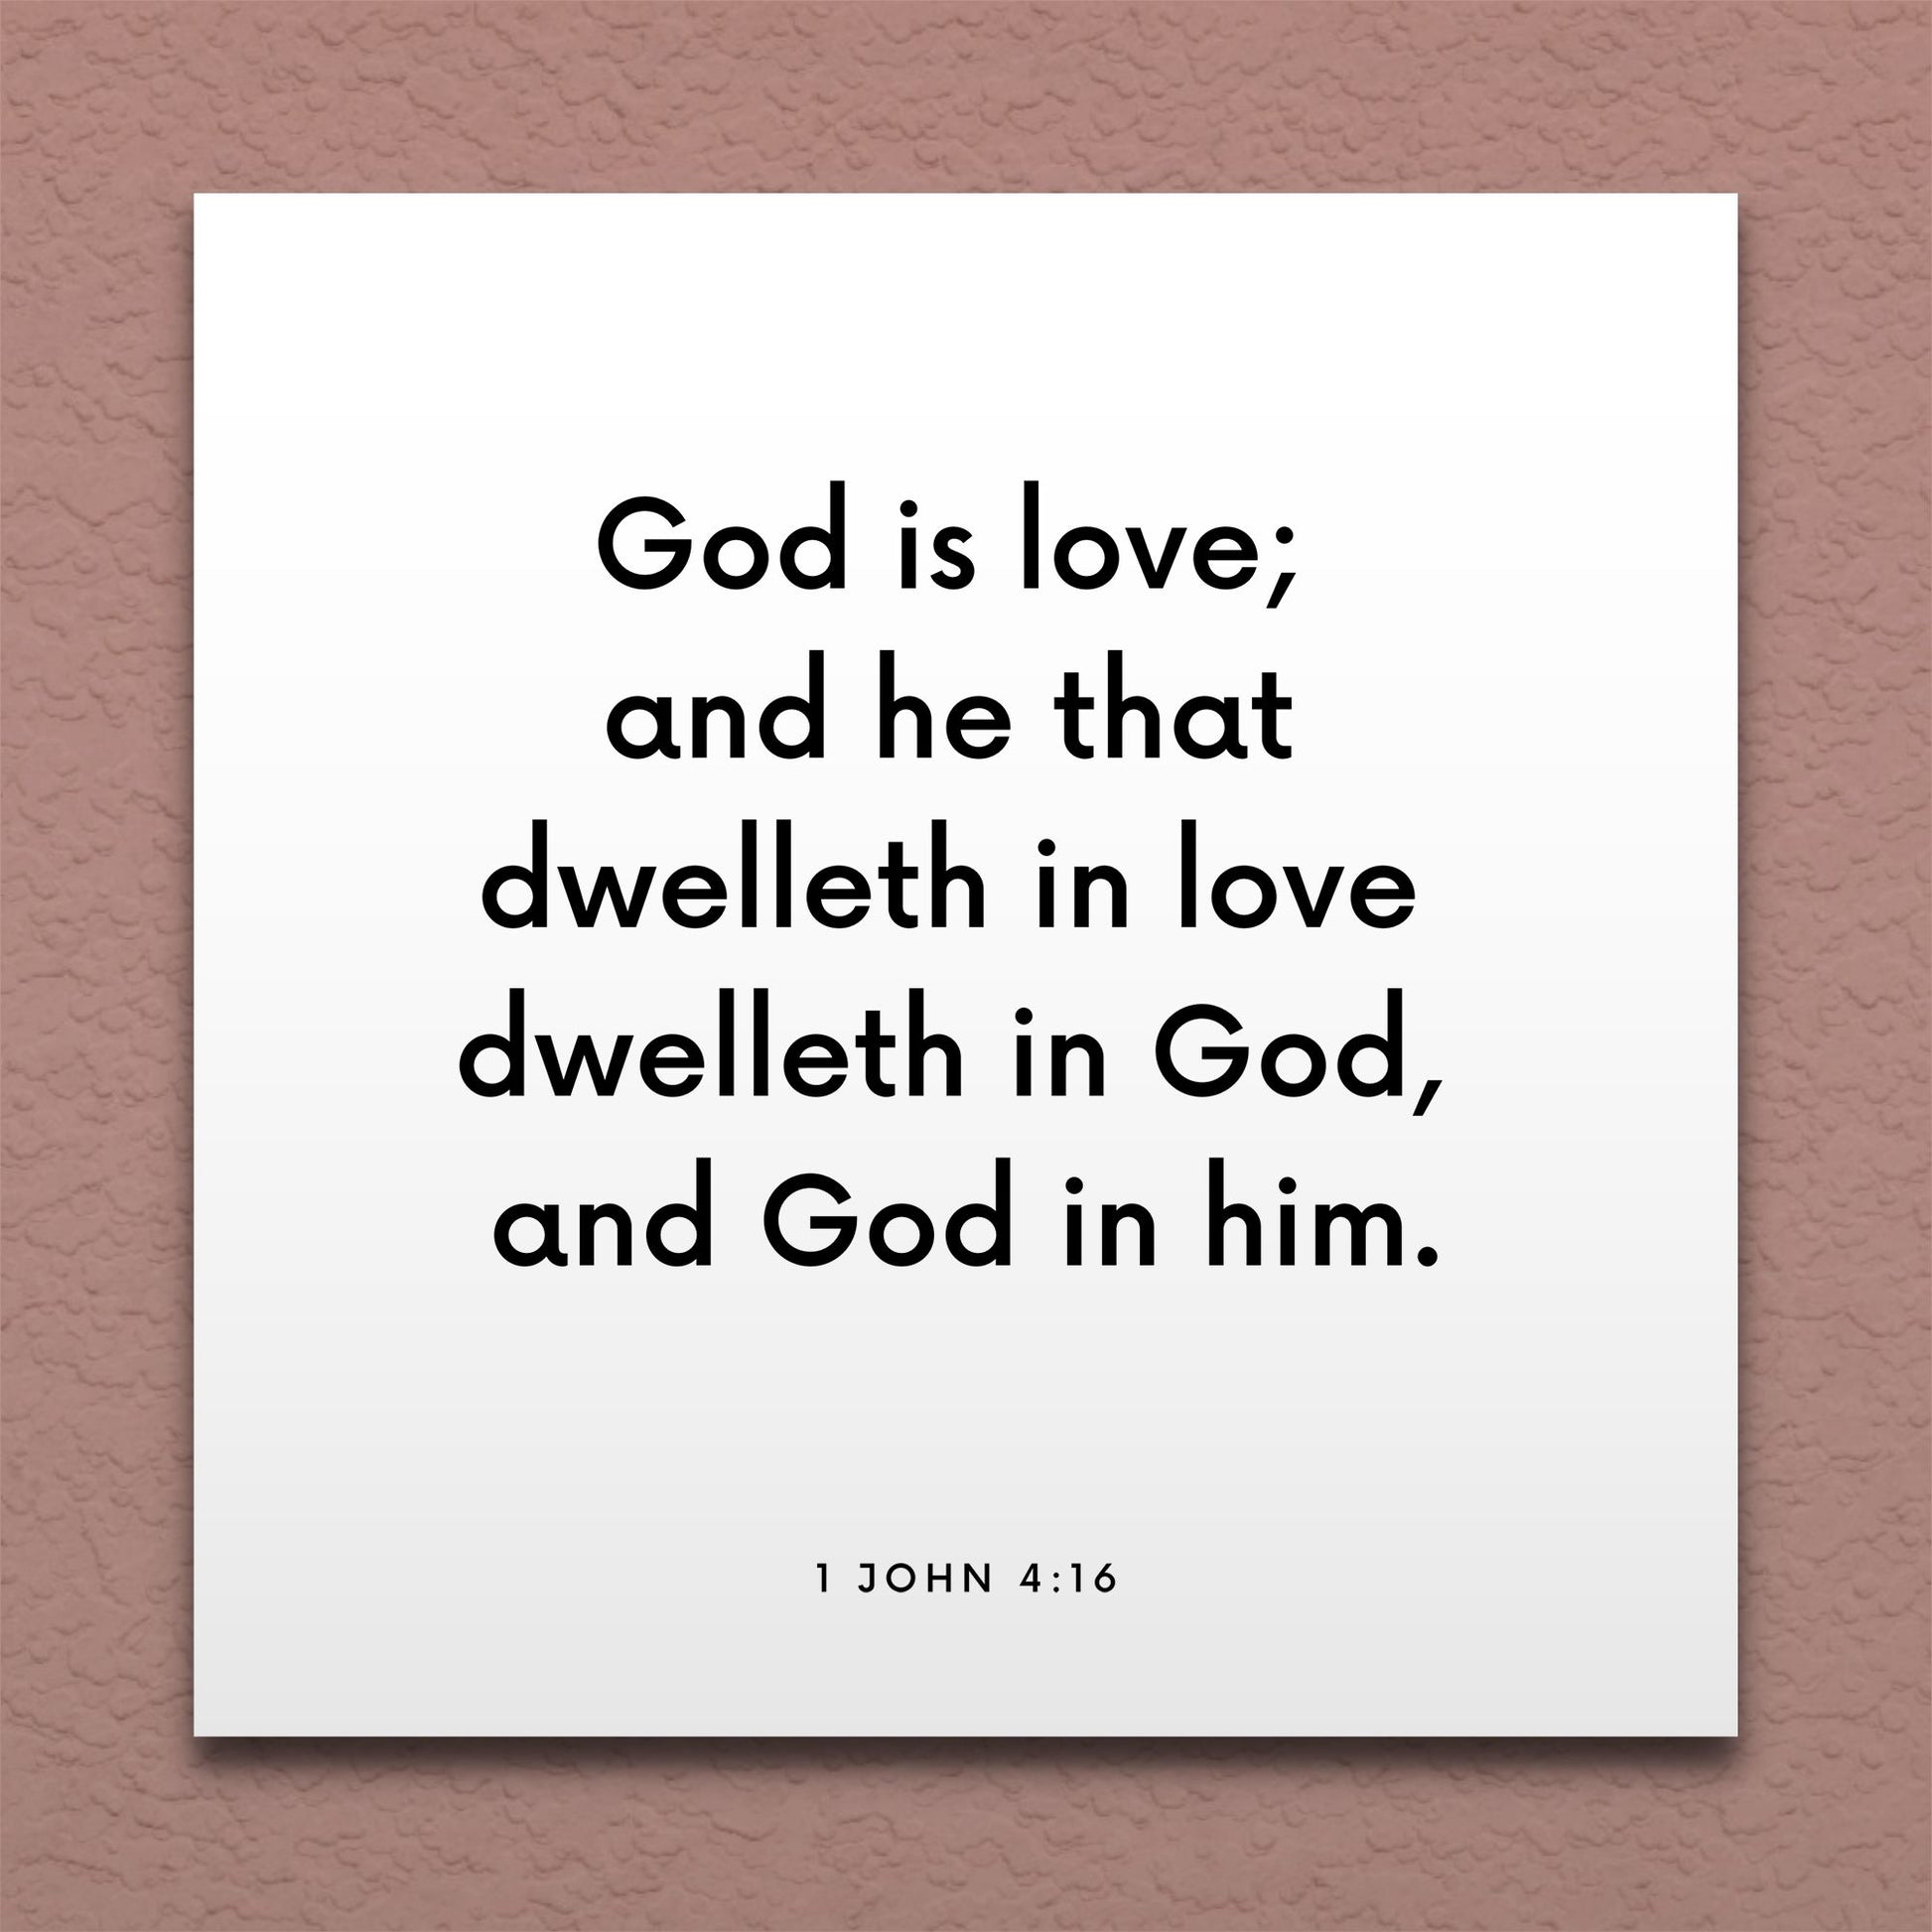 Wall-mounted scripture tile for 1 John 4:16 - "He that dwelleth in love dwelleth in God"